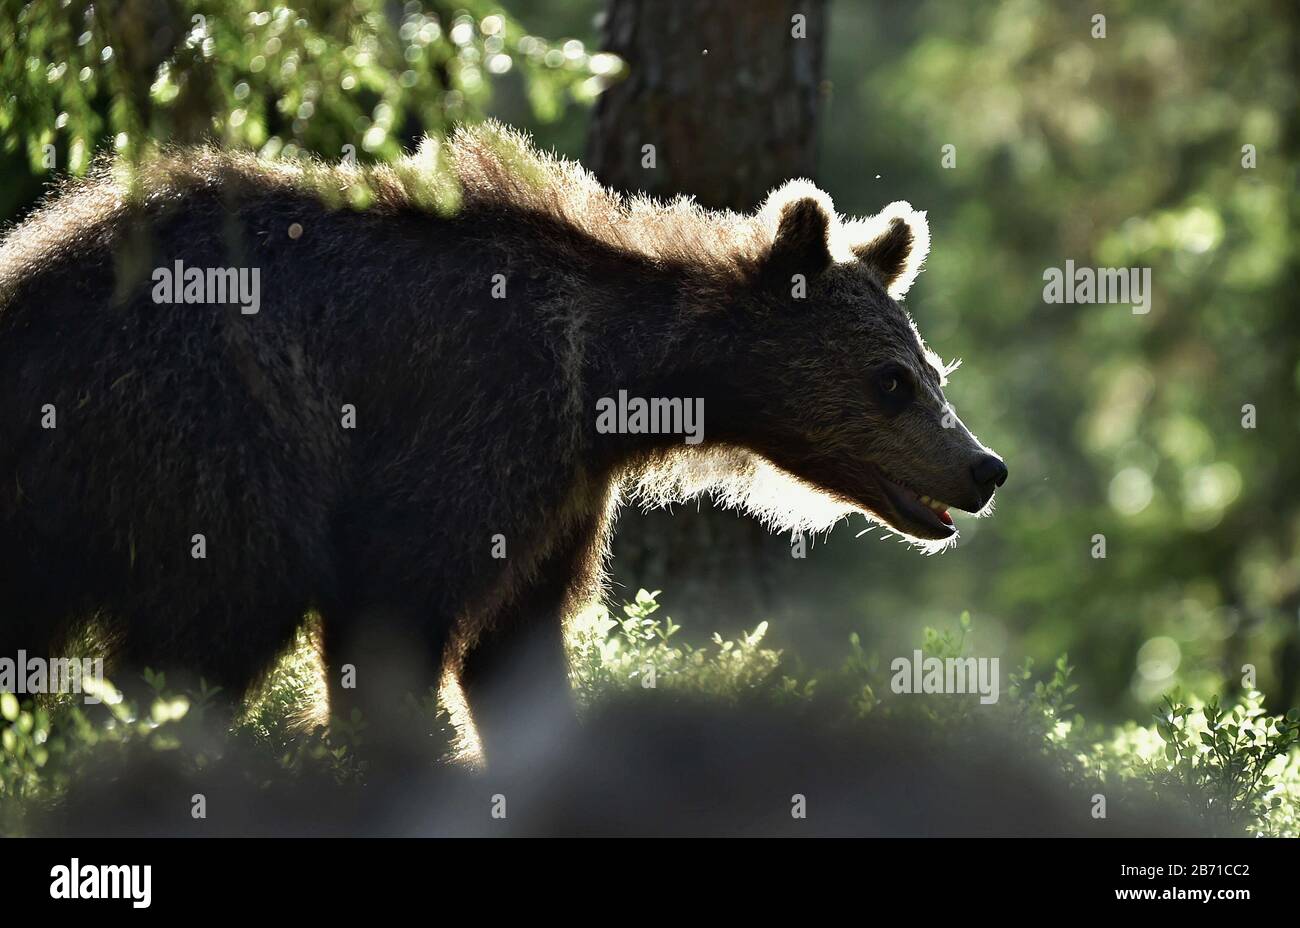 Backlit brown bear cub. Bear Cub against a sun. Brown bear in back light. Lit by evening sun at summer forest. Stock Photo